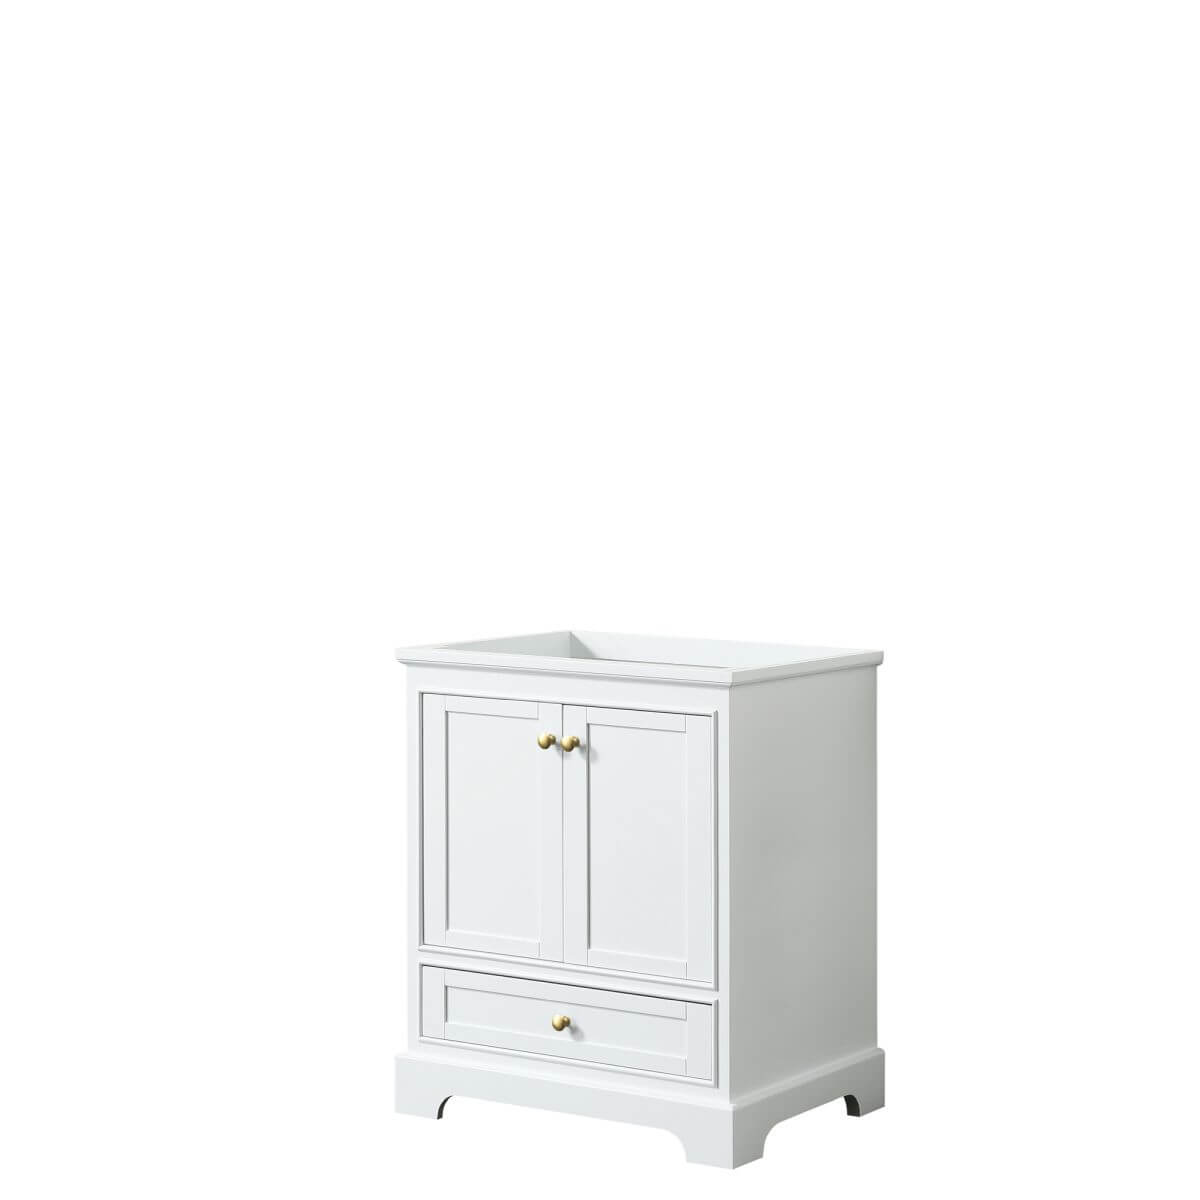 Wyndham Collection Deborah 30 inch Single Bathroom Vanity in White with Brushed Gold Trim, No Countertop, No Sink and No Mirror - WCS202030SWGCXSXXMXX